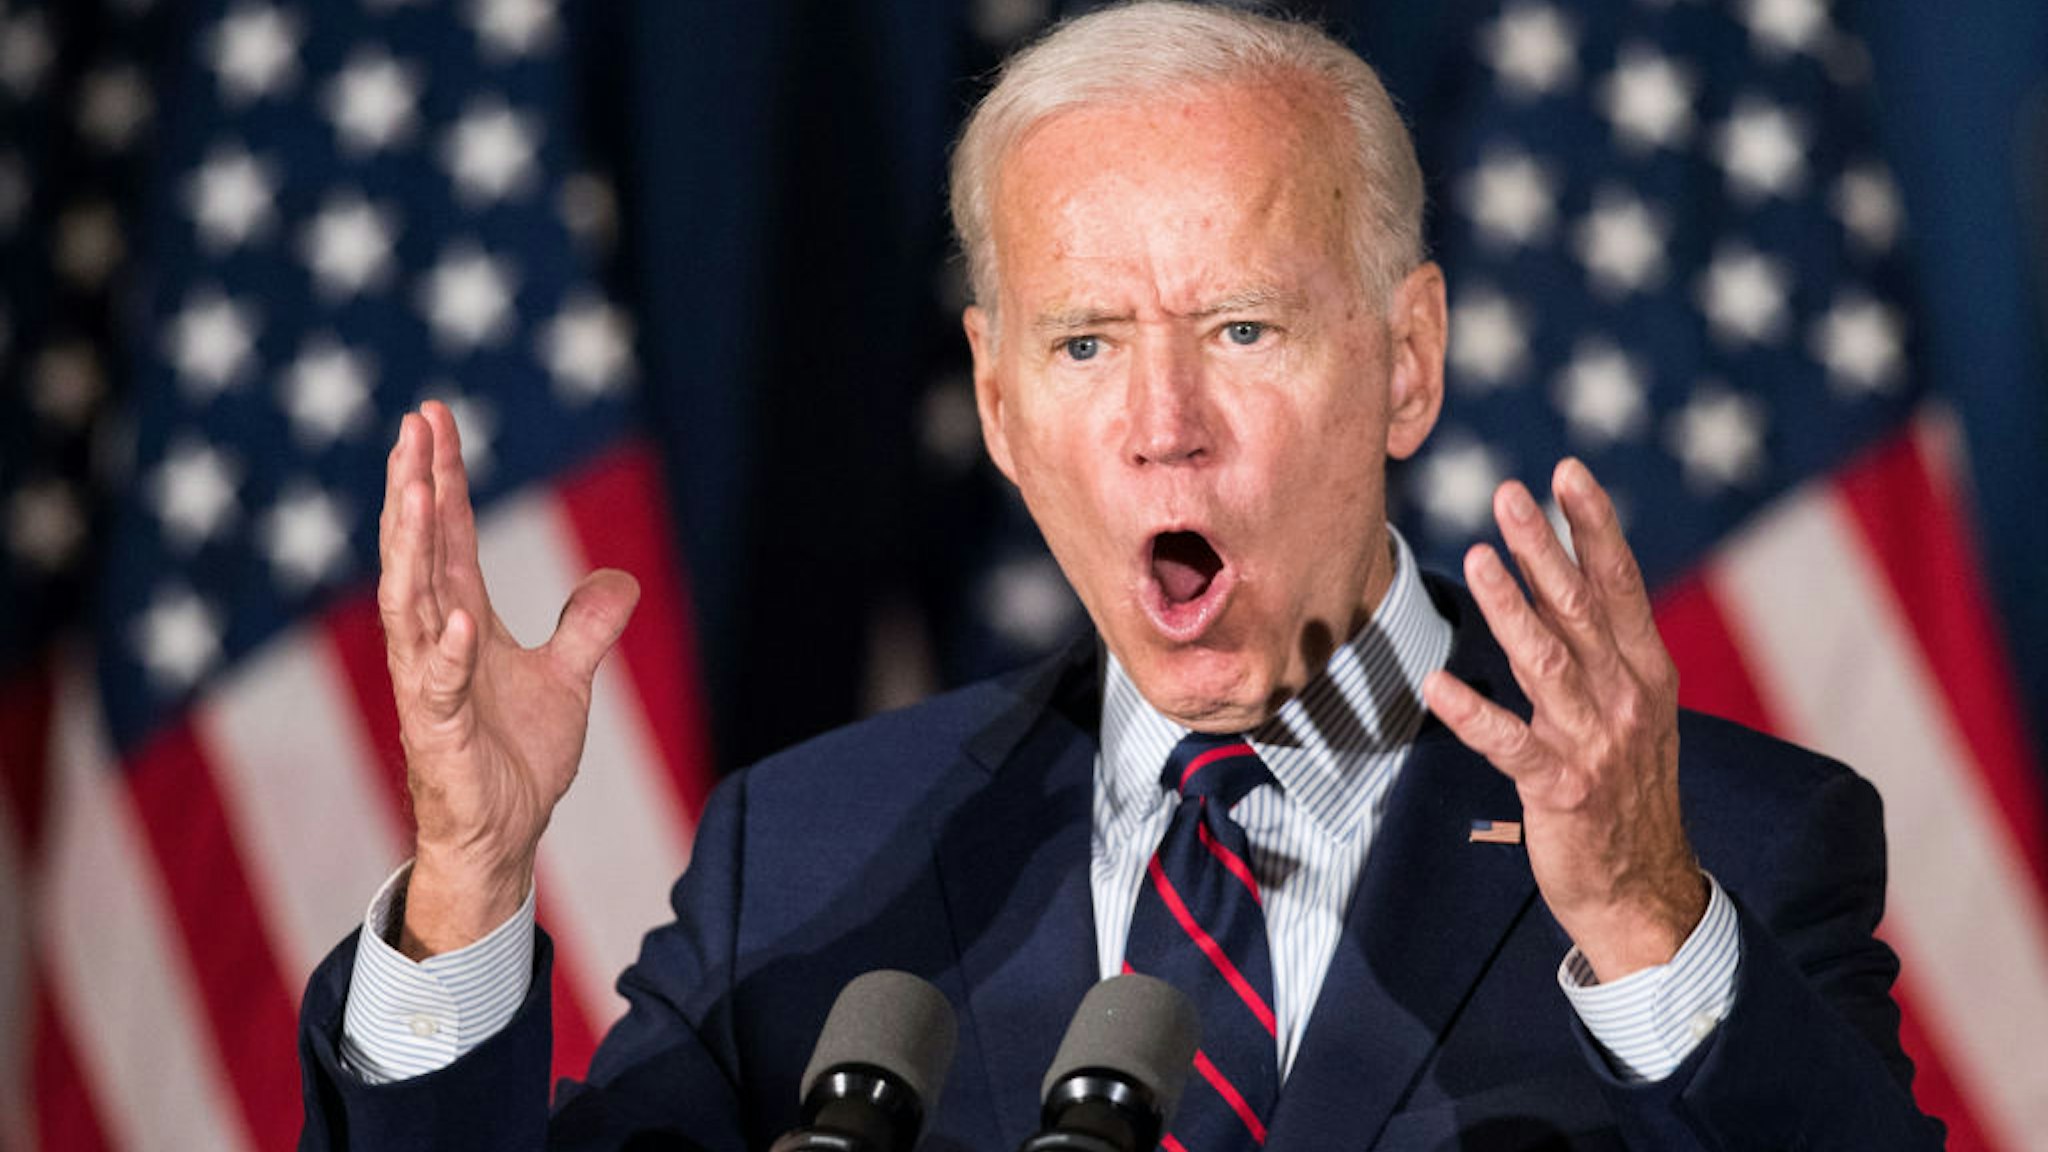 Democratic presidential candidate, former Vice President Joe Biden speaks during a campaign event on October 9, 2019 in Rochester, New Hampshire. For the first time, Biden has publicly called for President Trump to be impeached. (Photo by Scott Eisen/Getty Images)